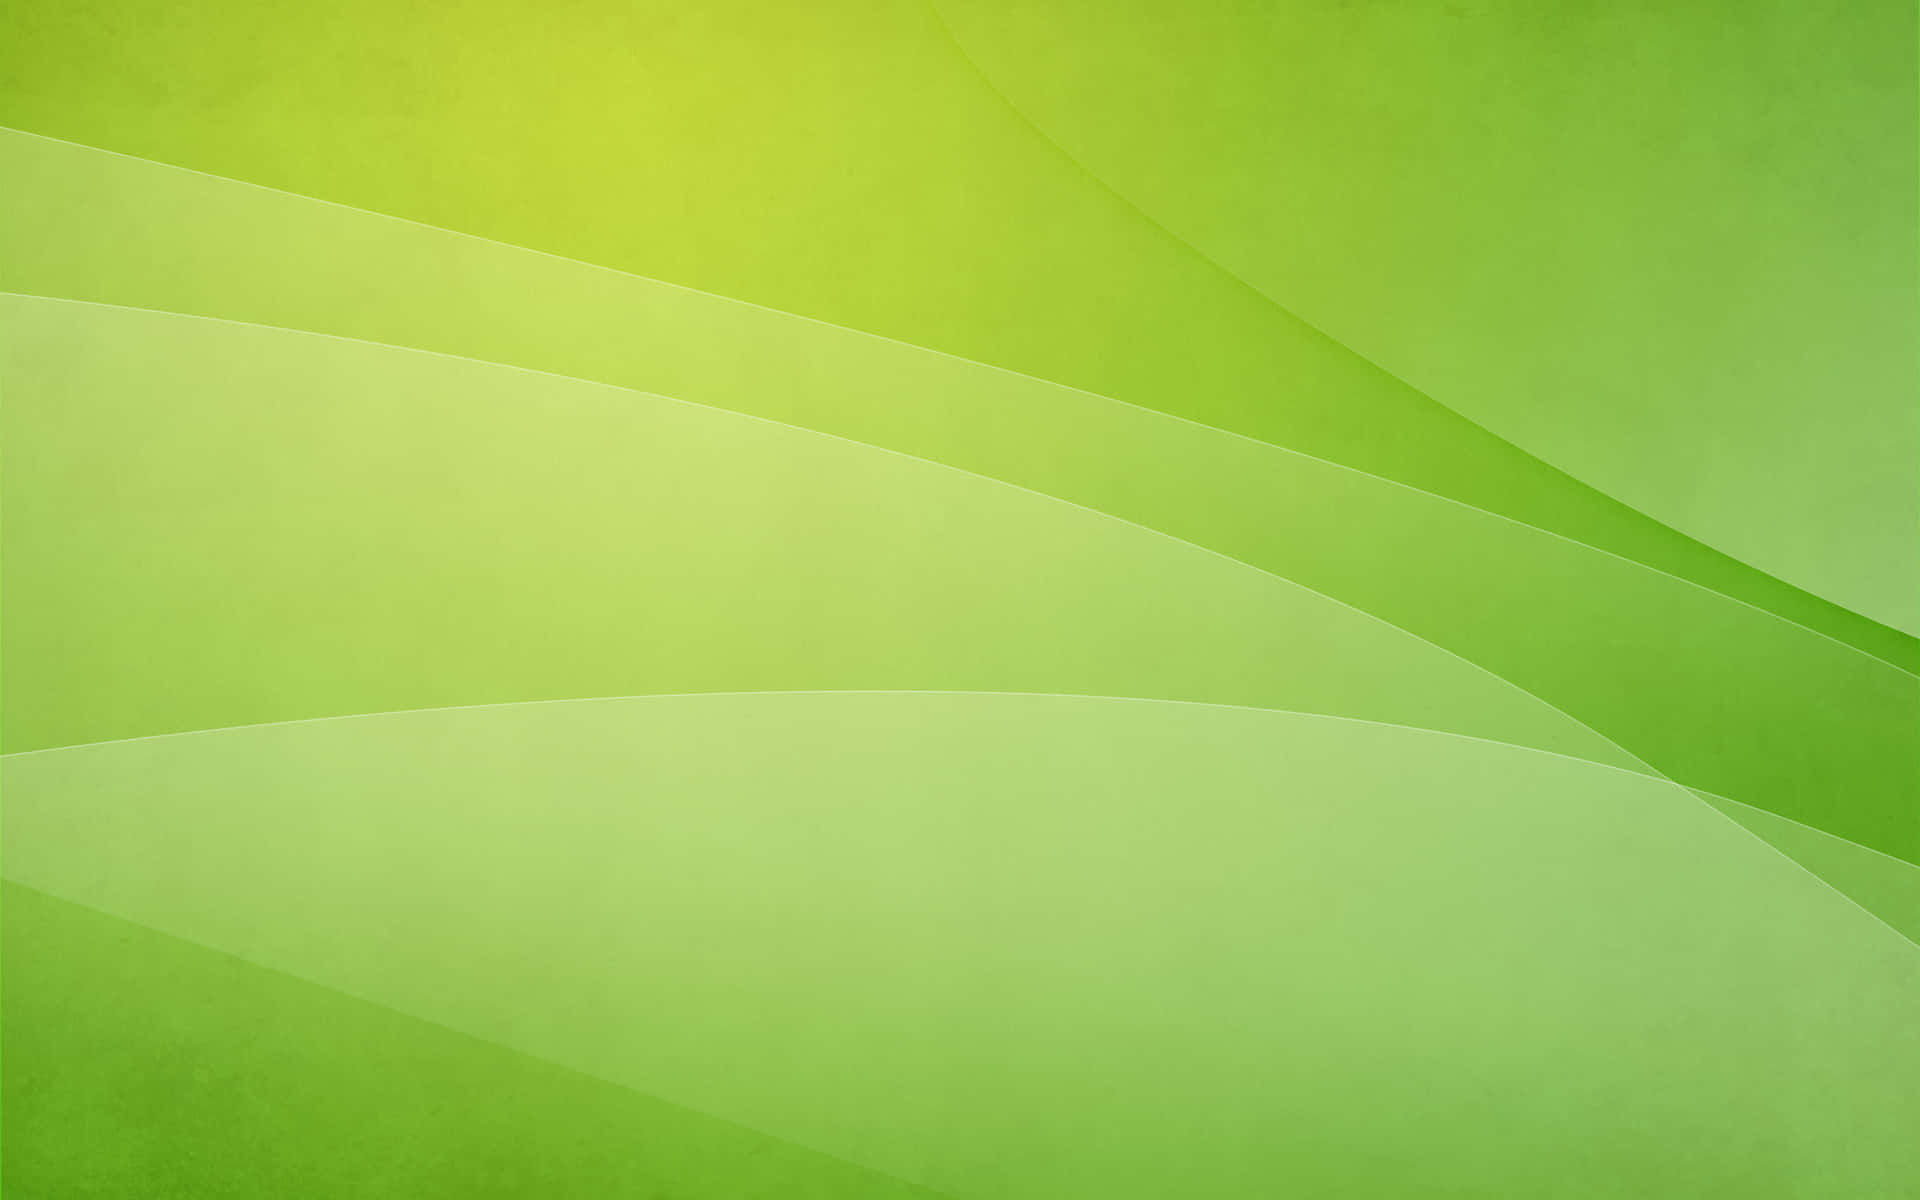 100+] Lime Green Backgrounds